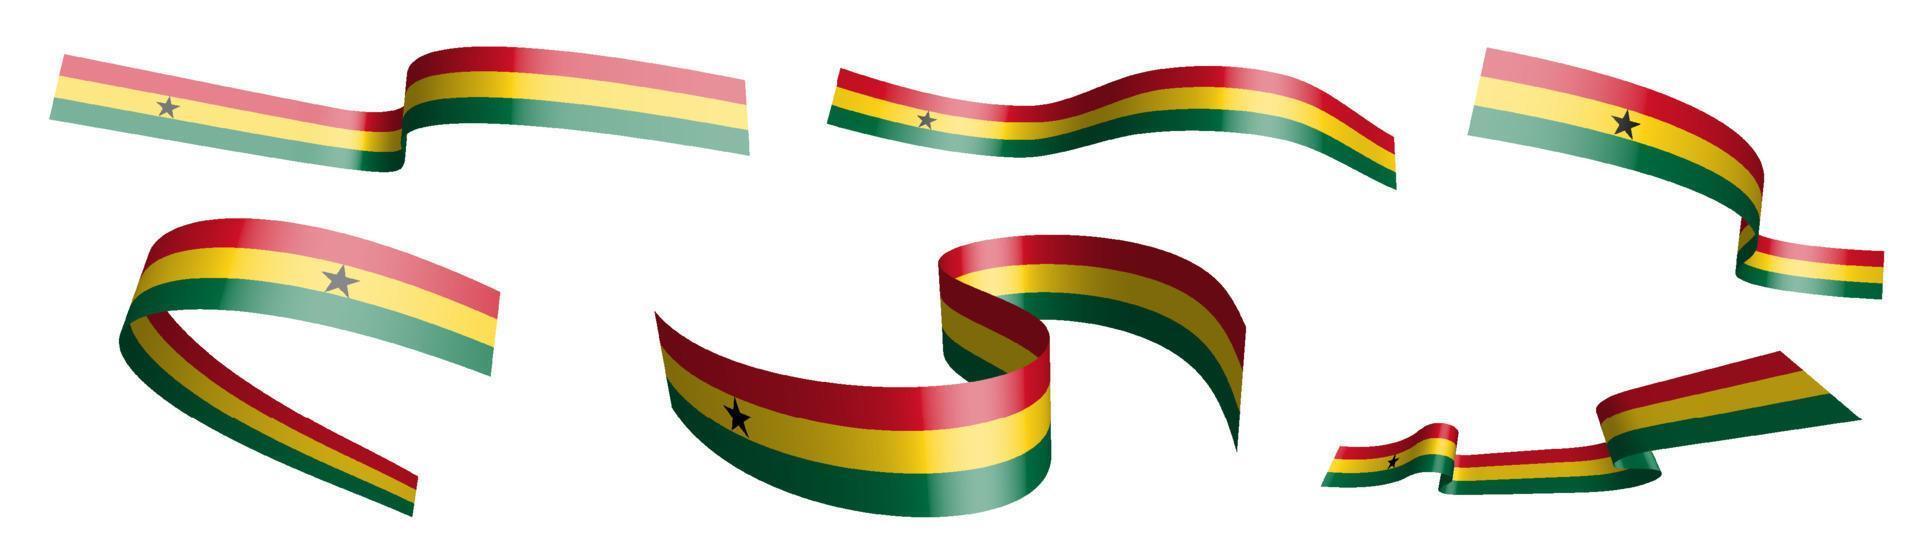 Set of holiday ribbons. Ghana flag waving in wind. Separation into lower and upper layers. Design element. Vector on white background